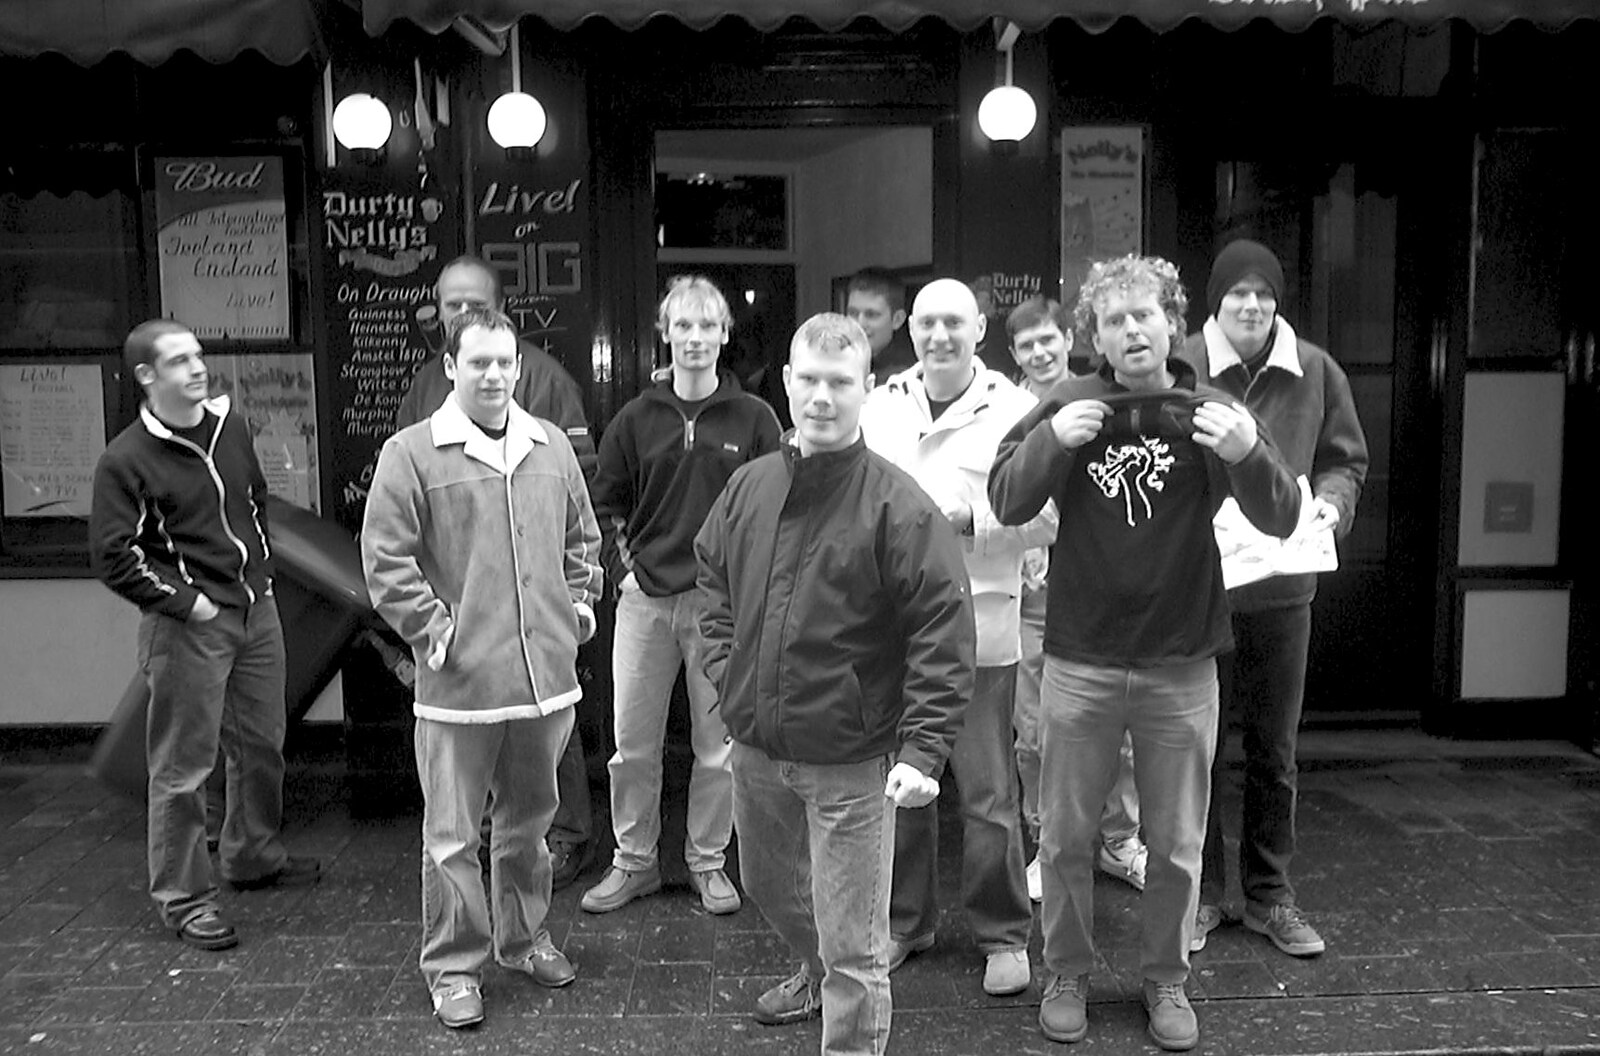 Outside Duty Nelly's from Anne Frank, Markets and Mikey-P's Stag Do, Amsterdam, Netherlands - 6th March 2004